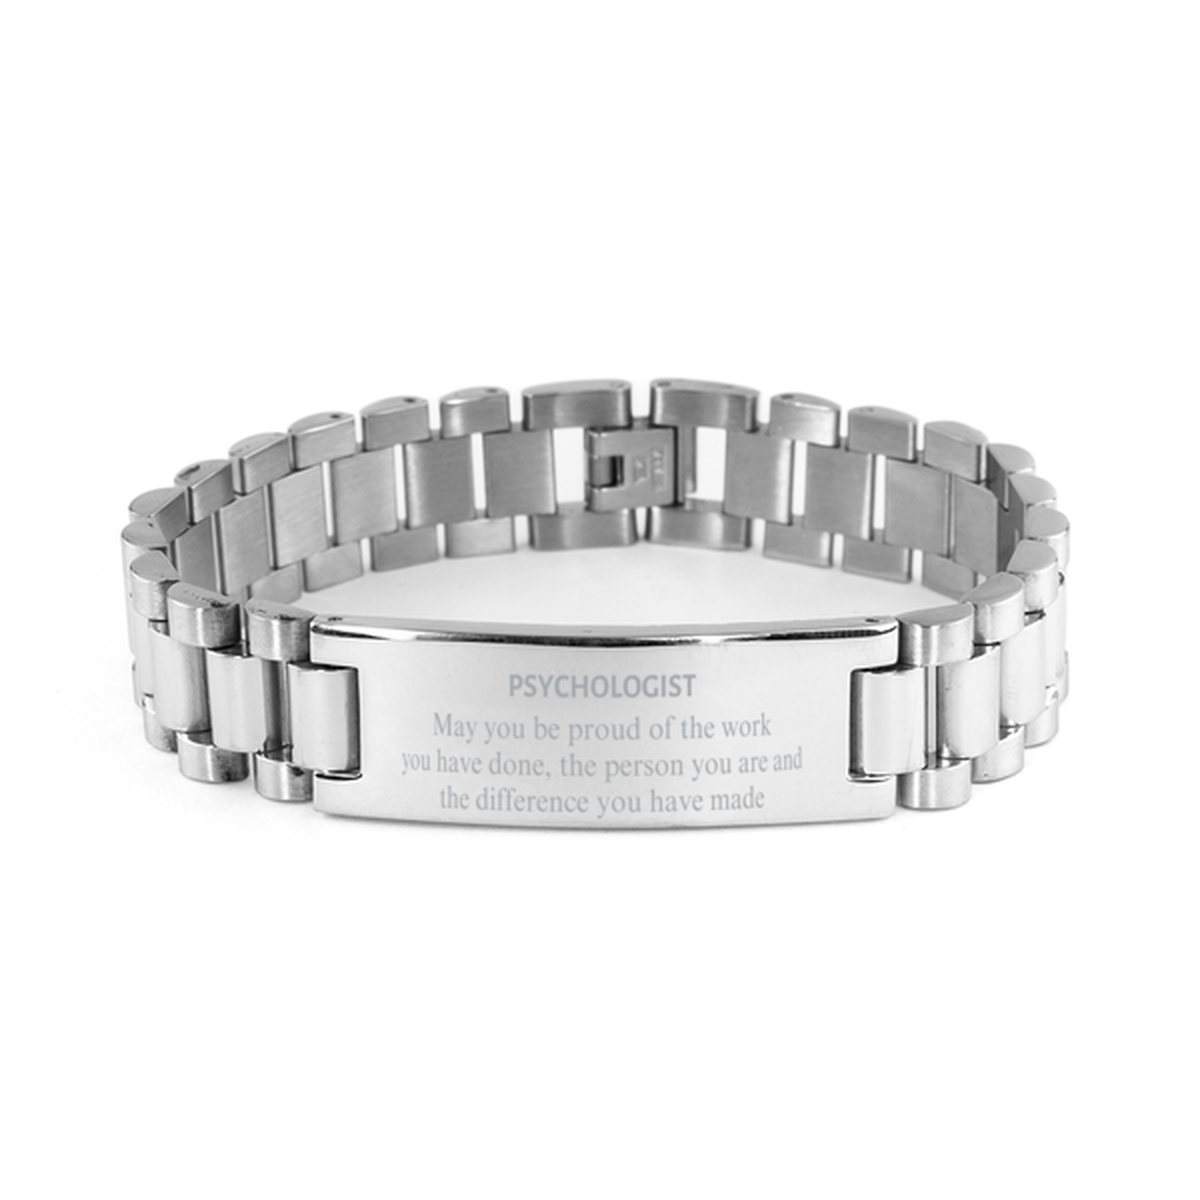 Psychologist May you be proud of the work you have done, Retirement Psychologist Ladder Stainless Steel Bracelet for Colleague Appreciation Gifts Amazing for Psychologist